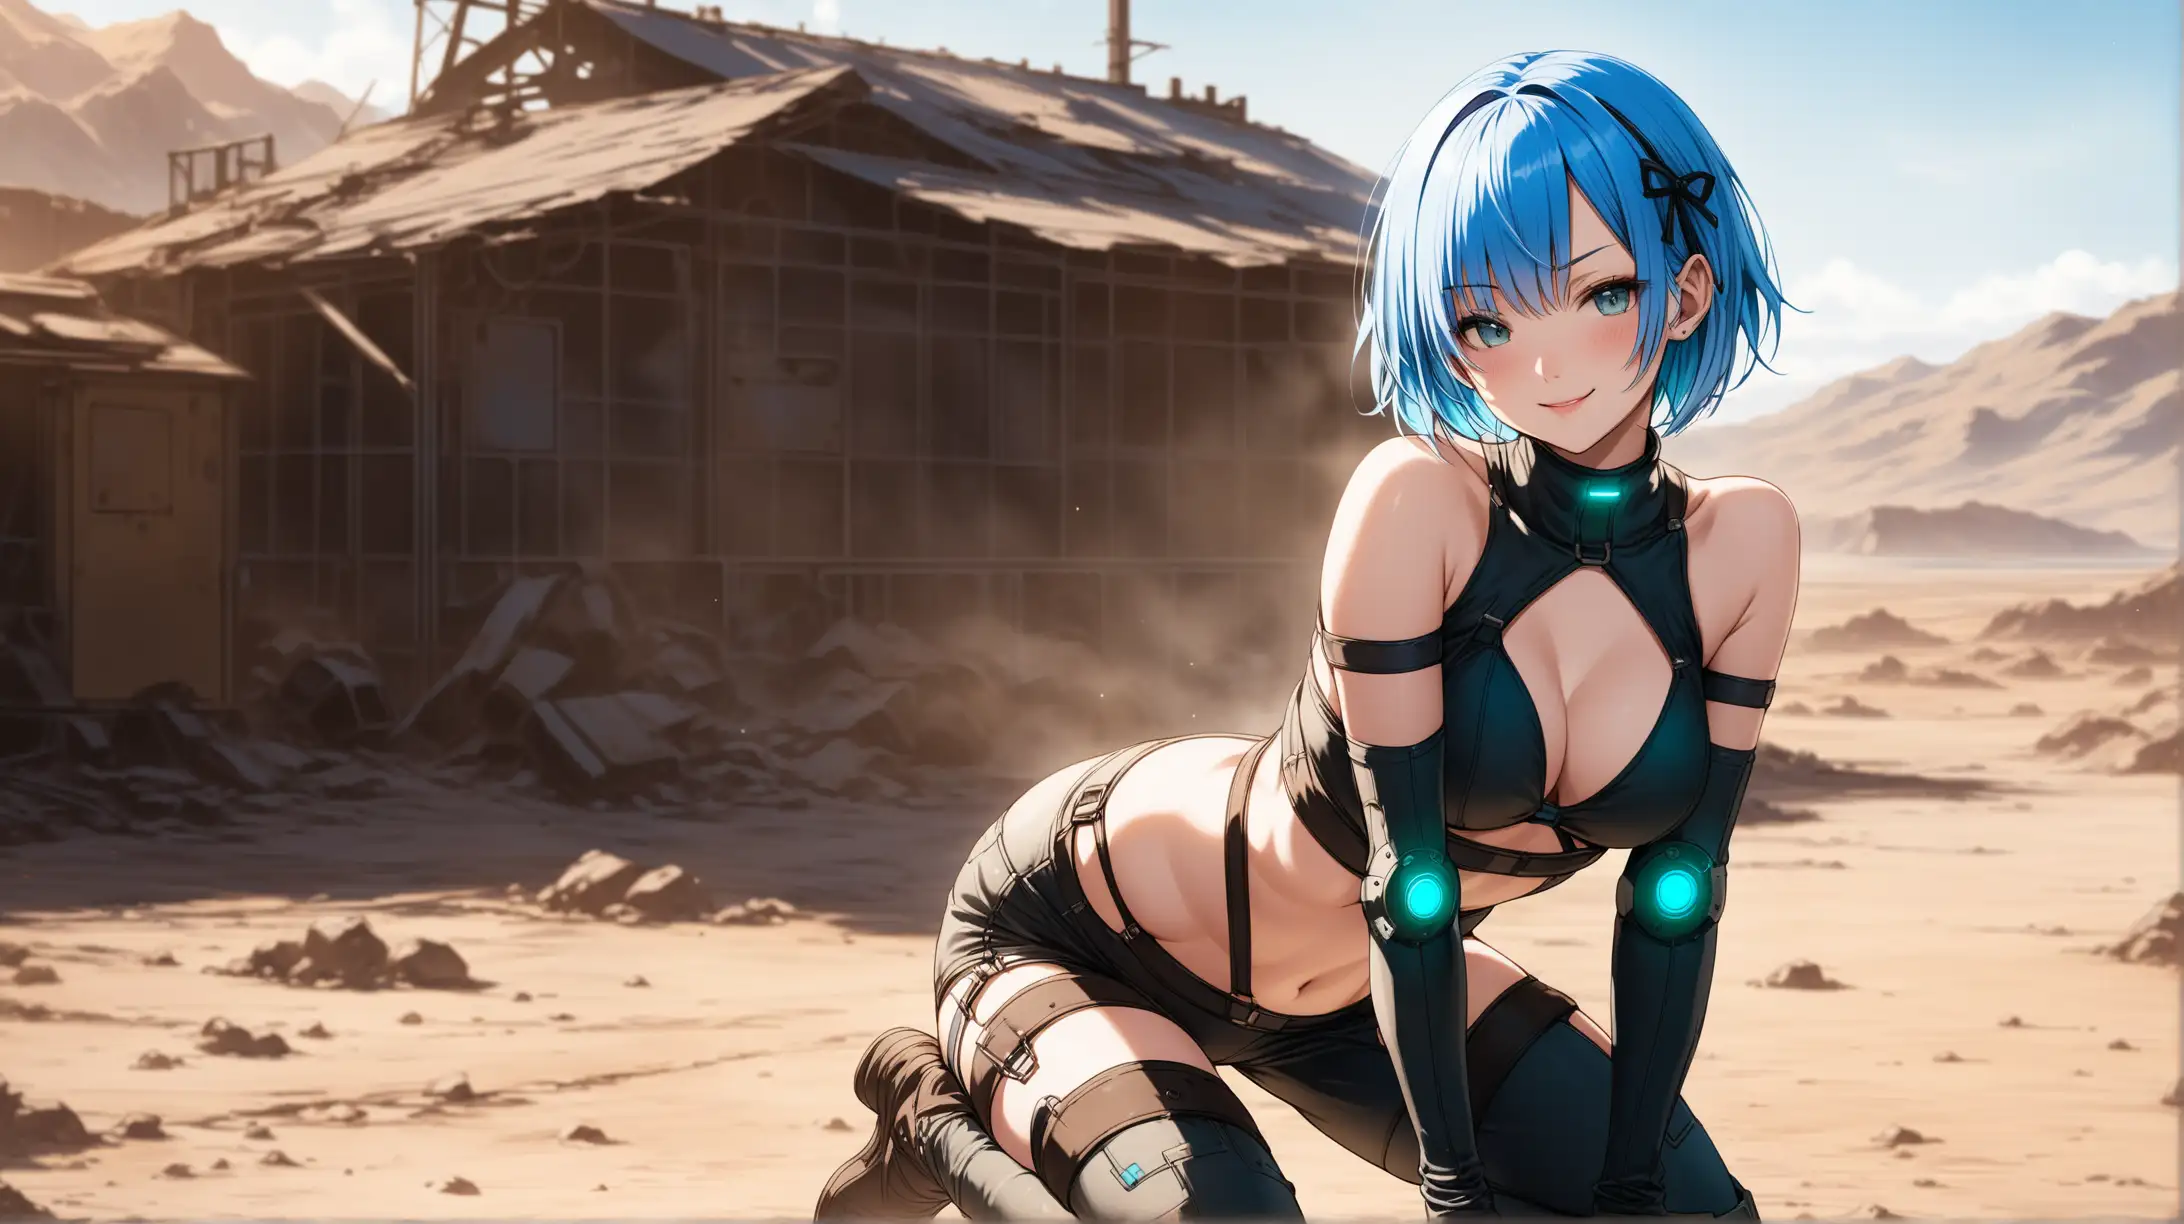 Draw the character Rem, high quality, outdoors, natural lighting, in a seductive pose, wearing an outfit inspired from the Fallout series, smiling flirtatiously at the viewer